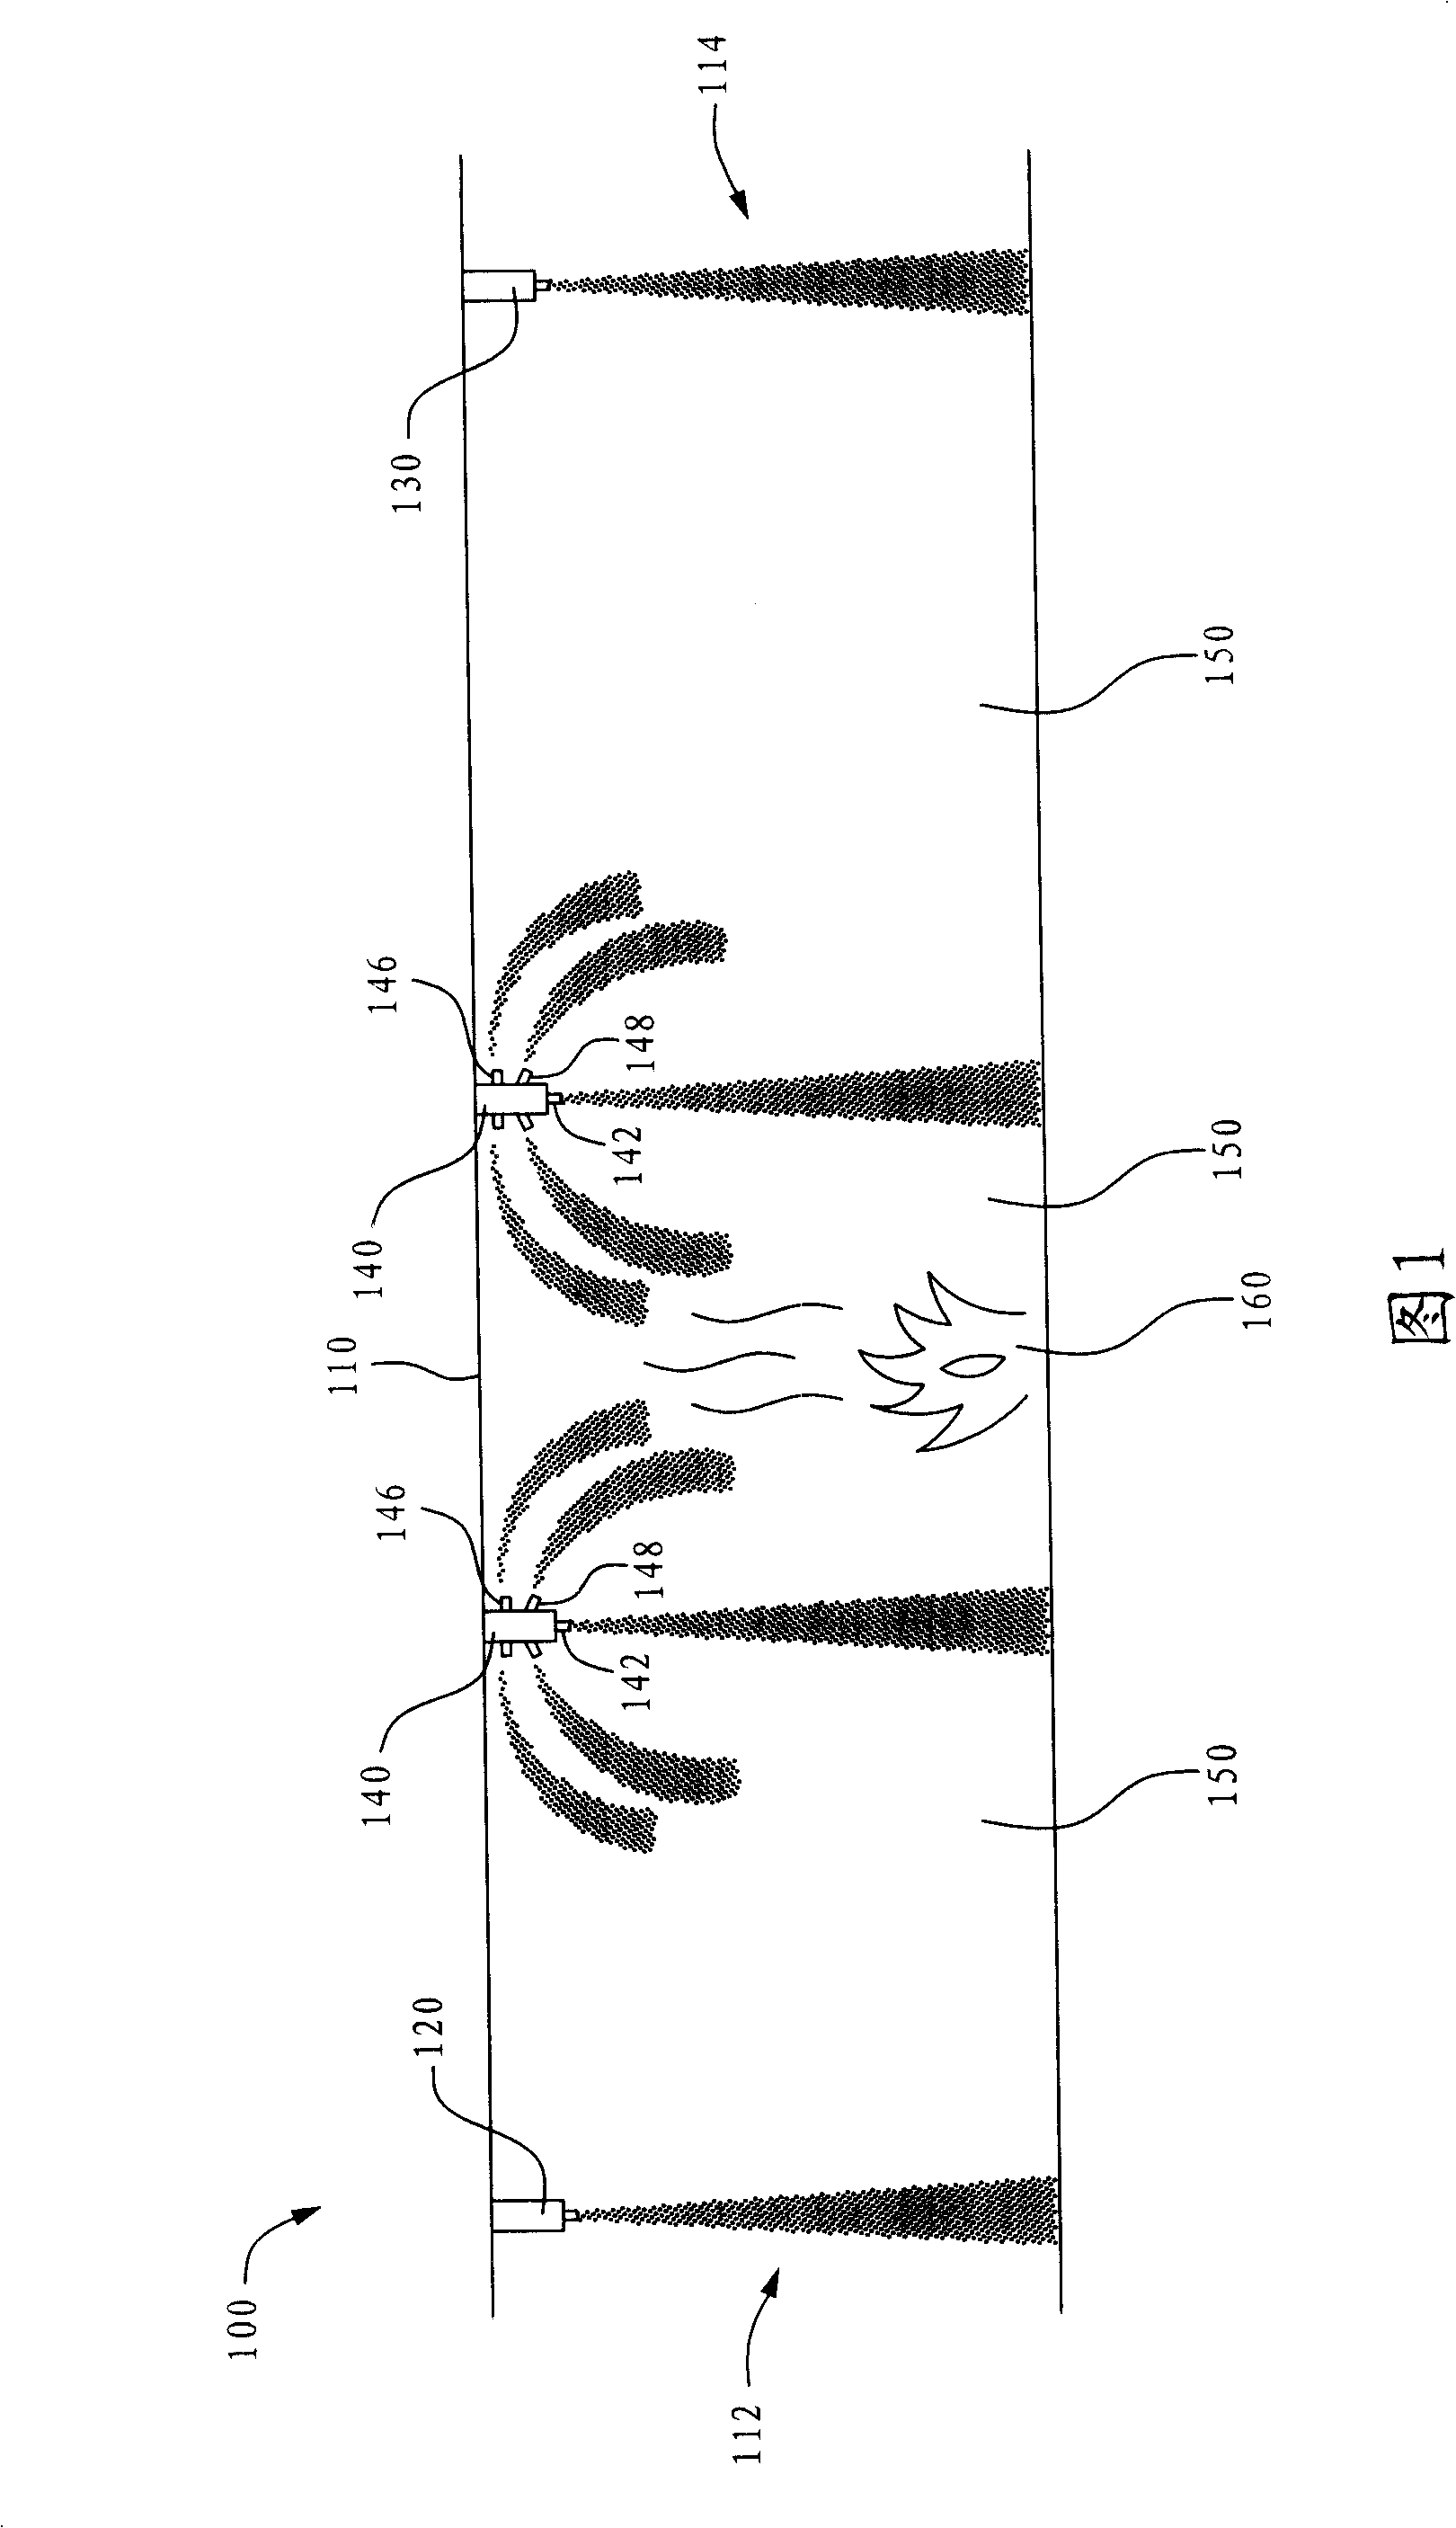 Long channel water fire extinguishing system and method